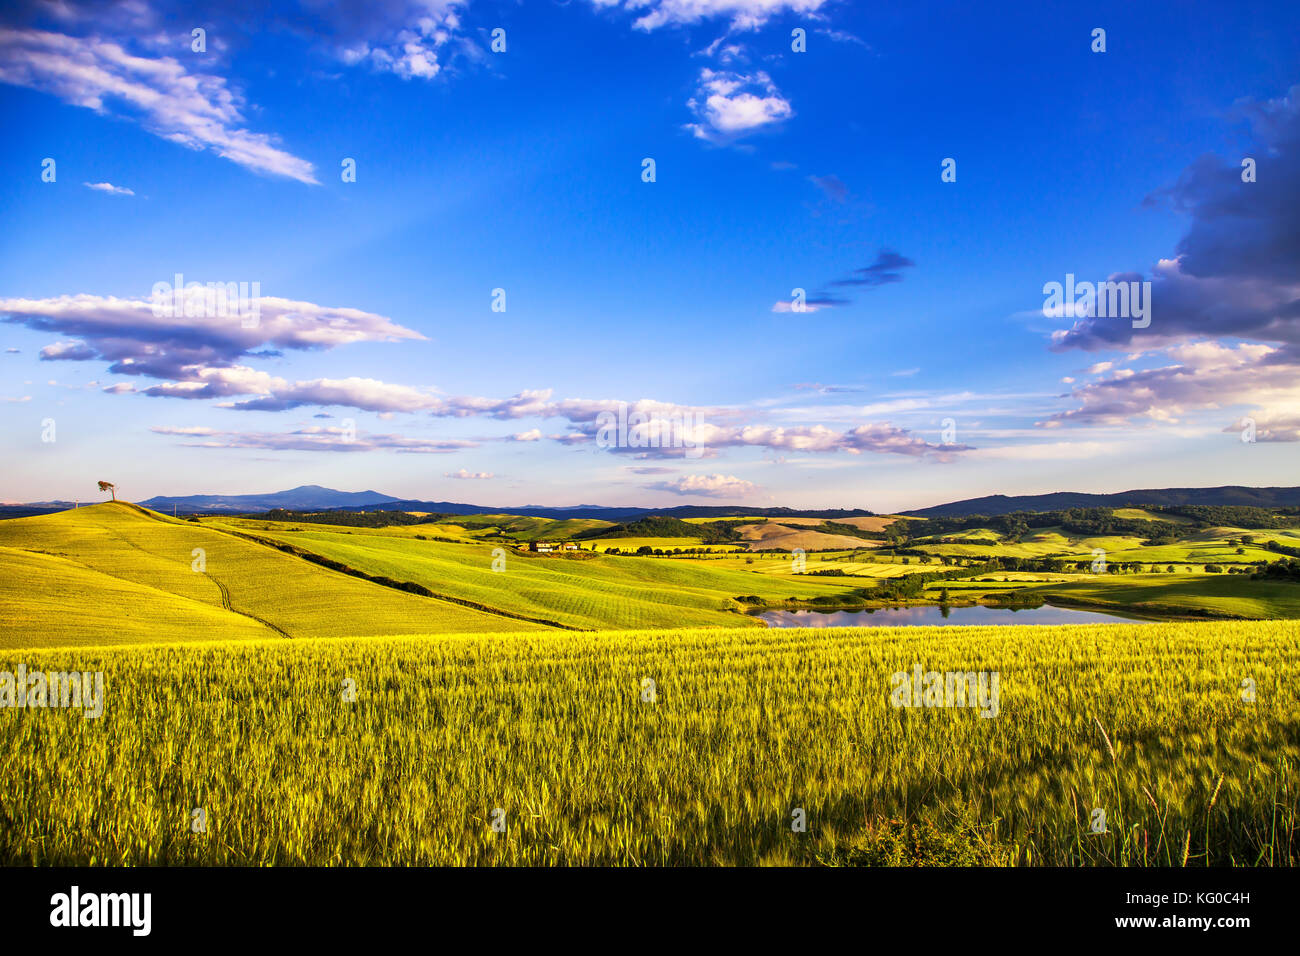 Tuscany spring, Siena countryside wheat fields, small lake and pine tree. Italy, Europe. Stock Photo